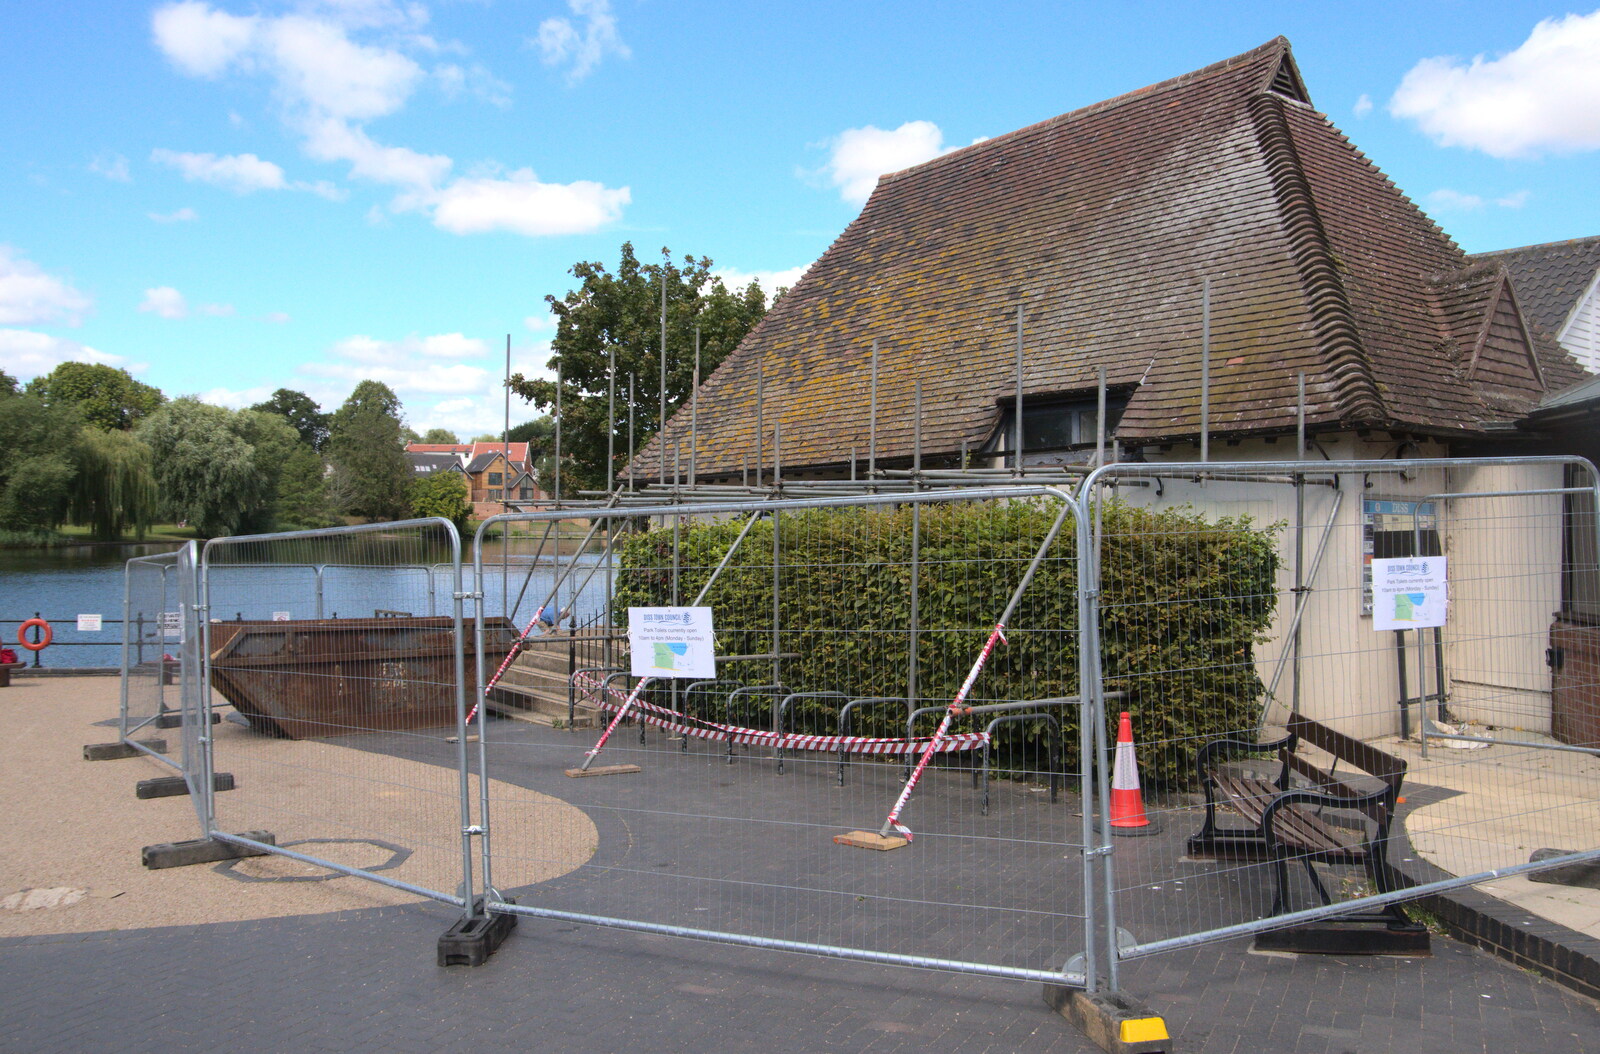 The toilets are all scaffolded up from Closed-Down Shops, Hedgehogs and Chamomile, Brome and Diss - 2nd August 2020